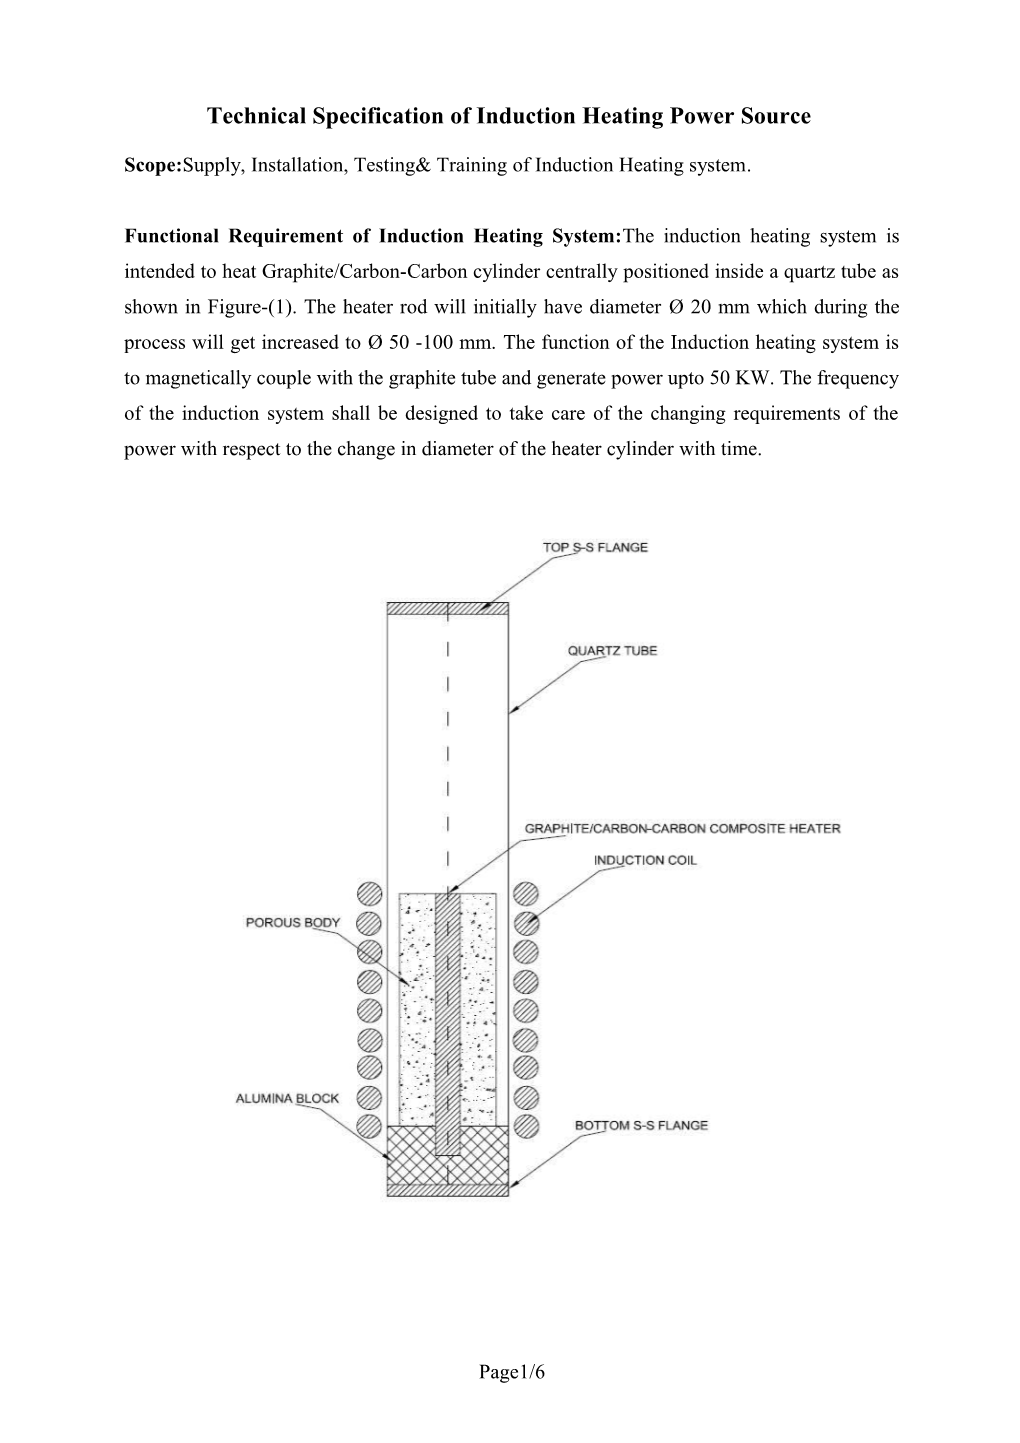 Technical Specification of Induction Heating Power Source